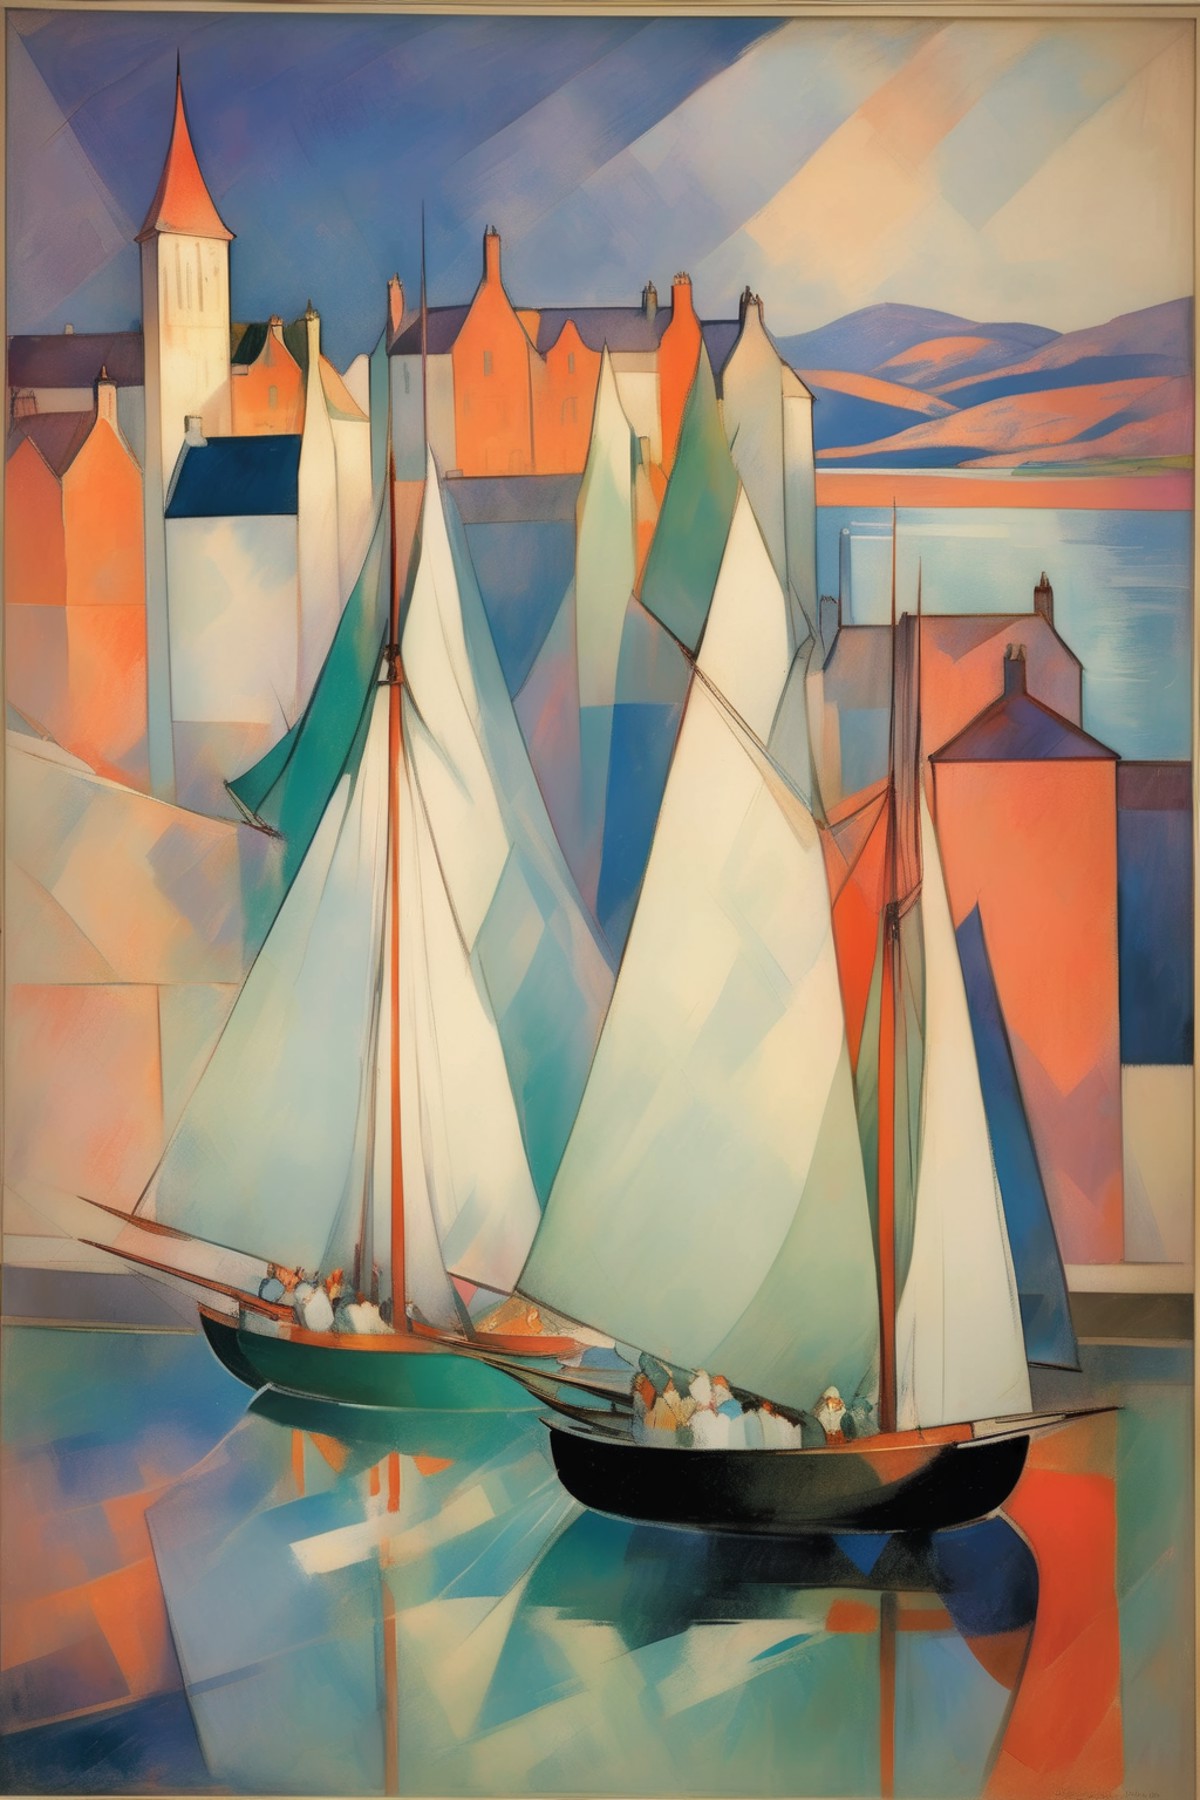 <lora:Lyonel Feininger Style:1>Lyonel Feininger Style - 101968. A painting by Jacques Villon. A painting of Oban and the F...